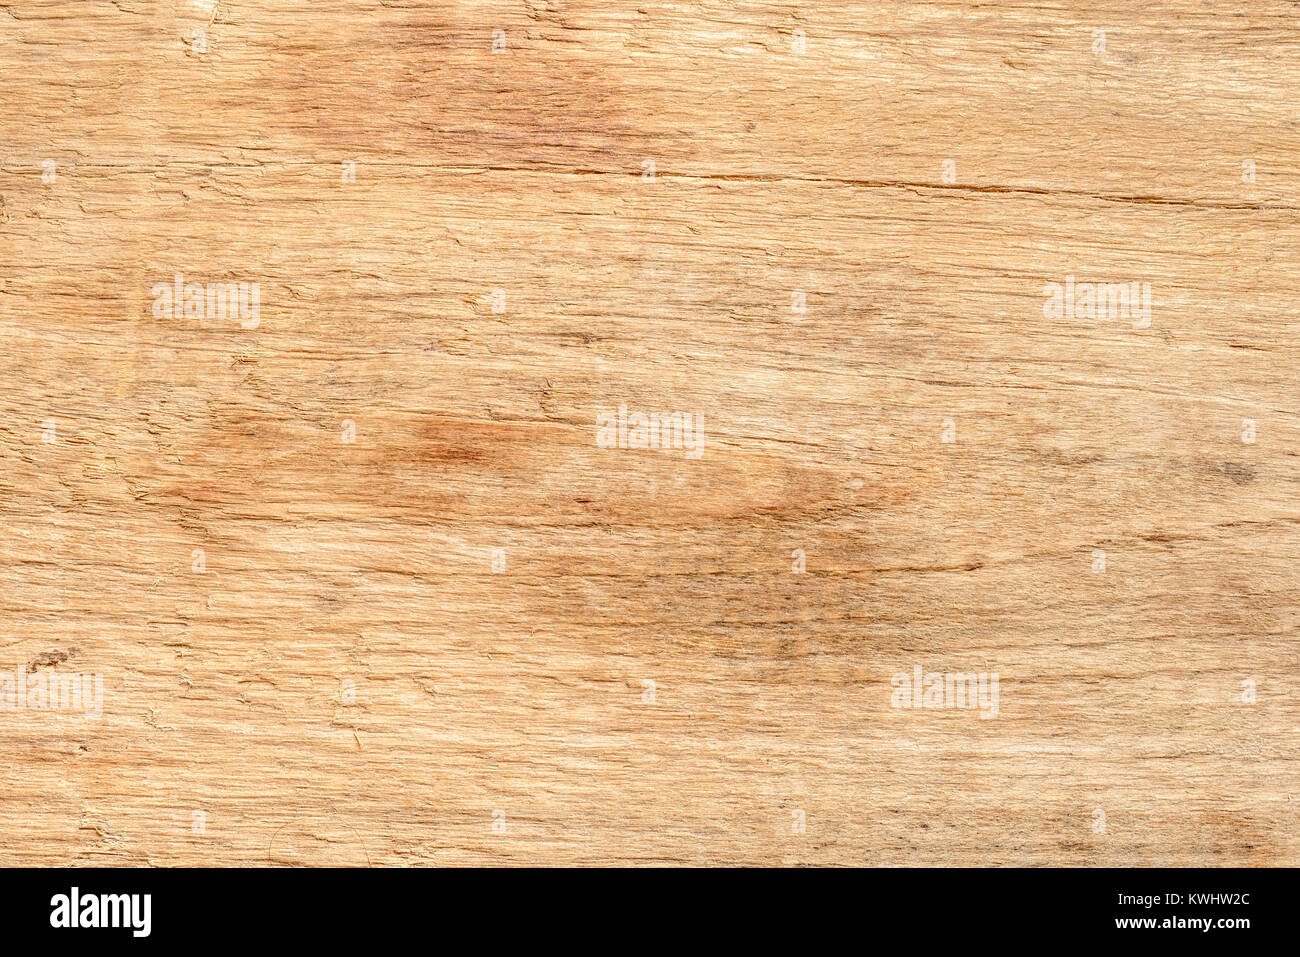 Natural light wood texture, detail of a plank. Probably fir or pine tree. Stock Photo